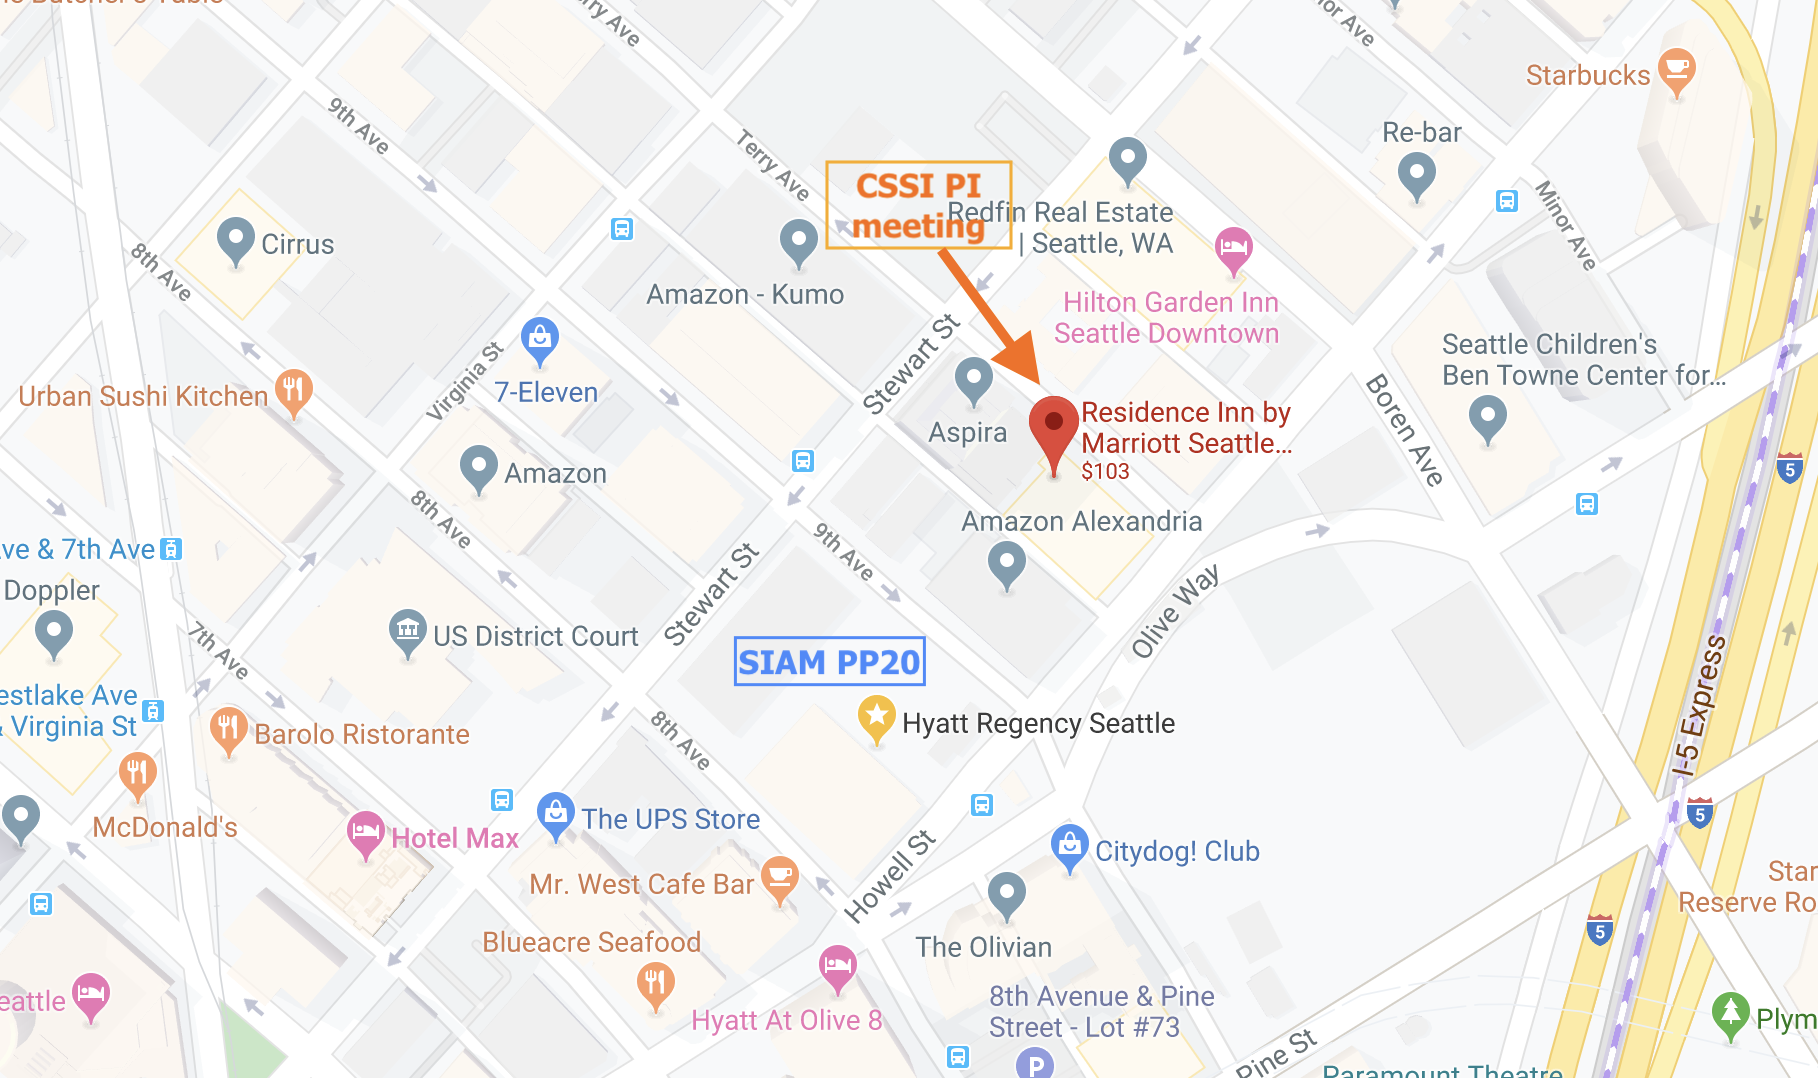 Locations of CSSI PI meeting and SIAM PP20